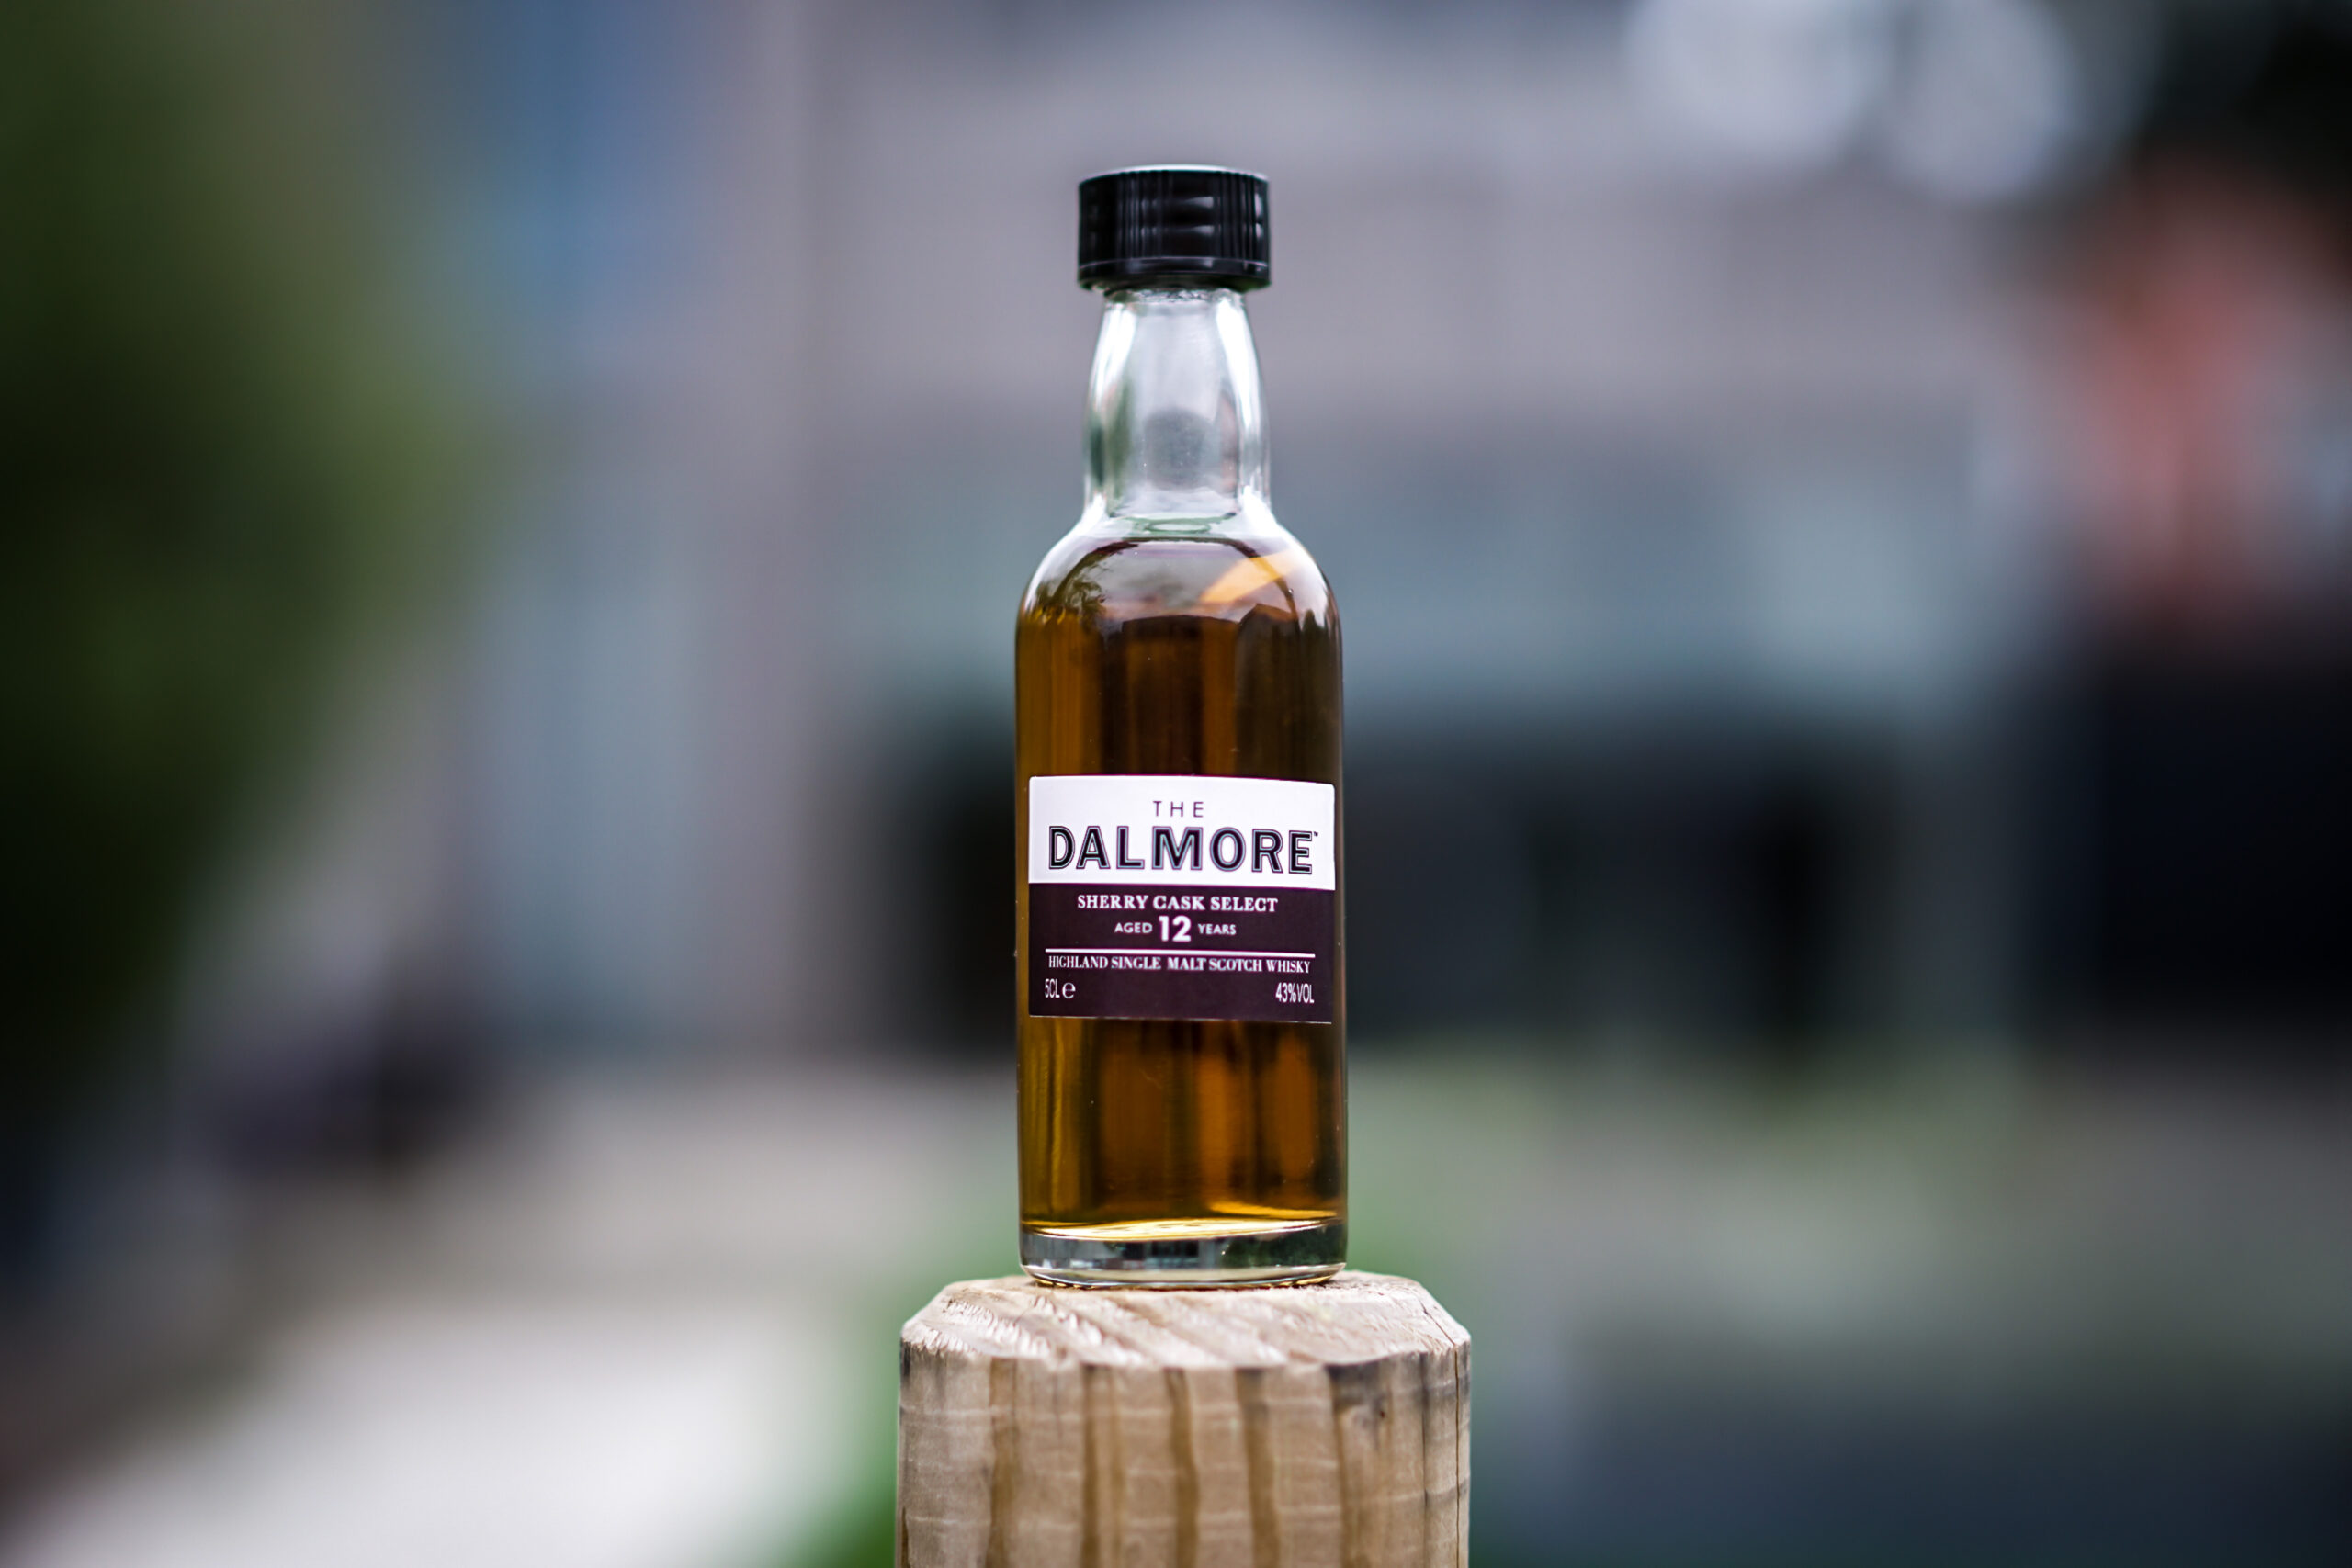 Dalmore 12 year old Sherry Cask Select